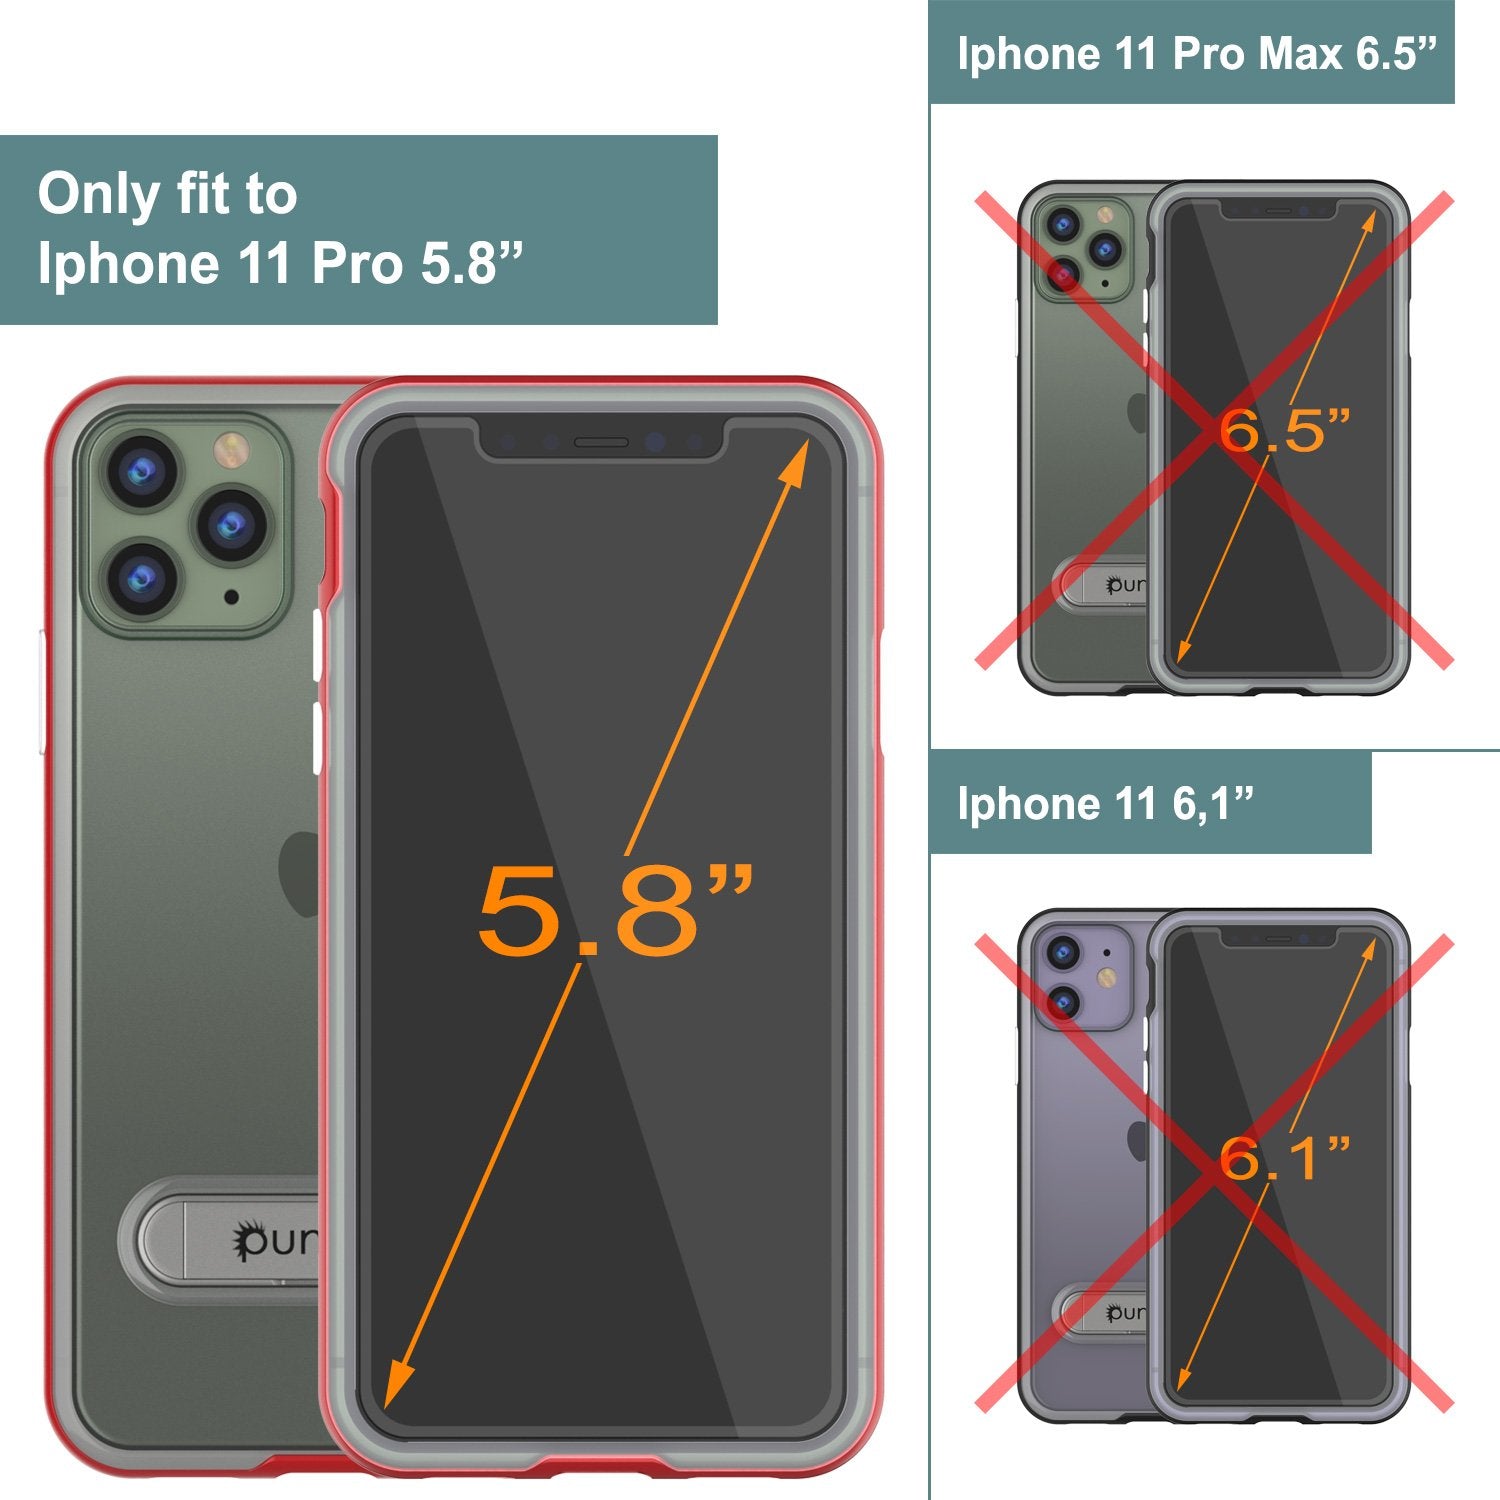 iPhone 11 Pro Case, PUNKcase [LUCID 3.0 Series] [Slim Fit] Armor Cover w/ Integrated Screen Protector [Red]